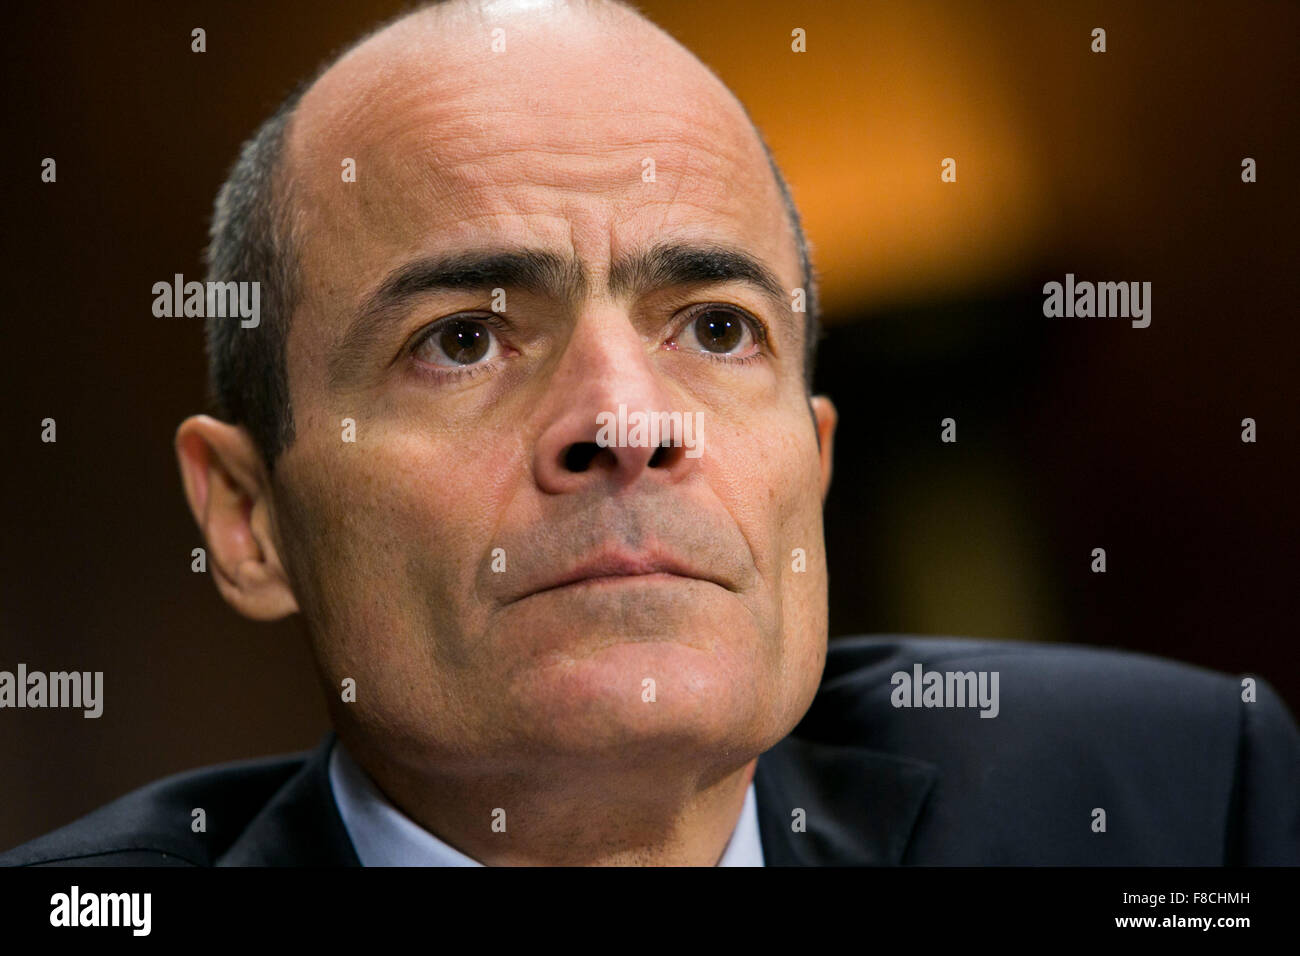 Washington DC, USA. 8th December, 2015. Carlos Brito, CEO, Anheuser-Busch InBev, speaks during a Senate Judiciary Committee Hearing in Washington, D.C., on December 8, 2015. The hearing looked into possible anti-trust issues with AB InBev's proposed $100 billion acquisition of SABMiller. Credit:  Kristoffer Tripplaar/Alamy Live News Stock Photo